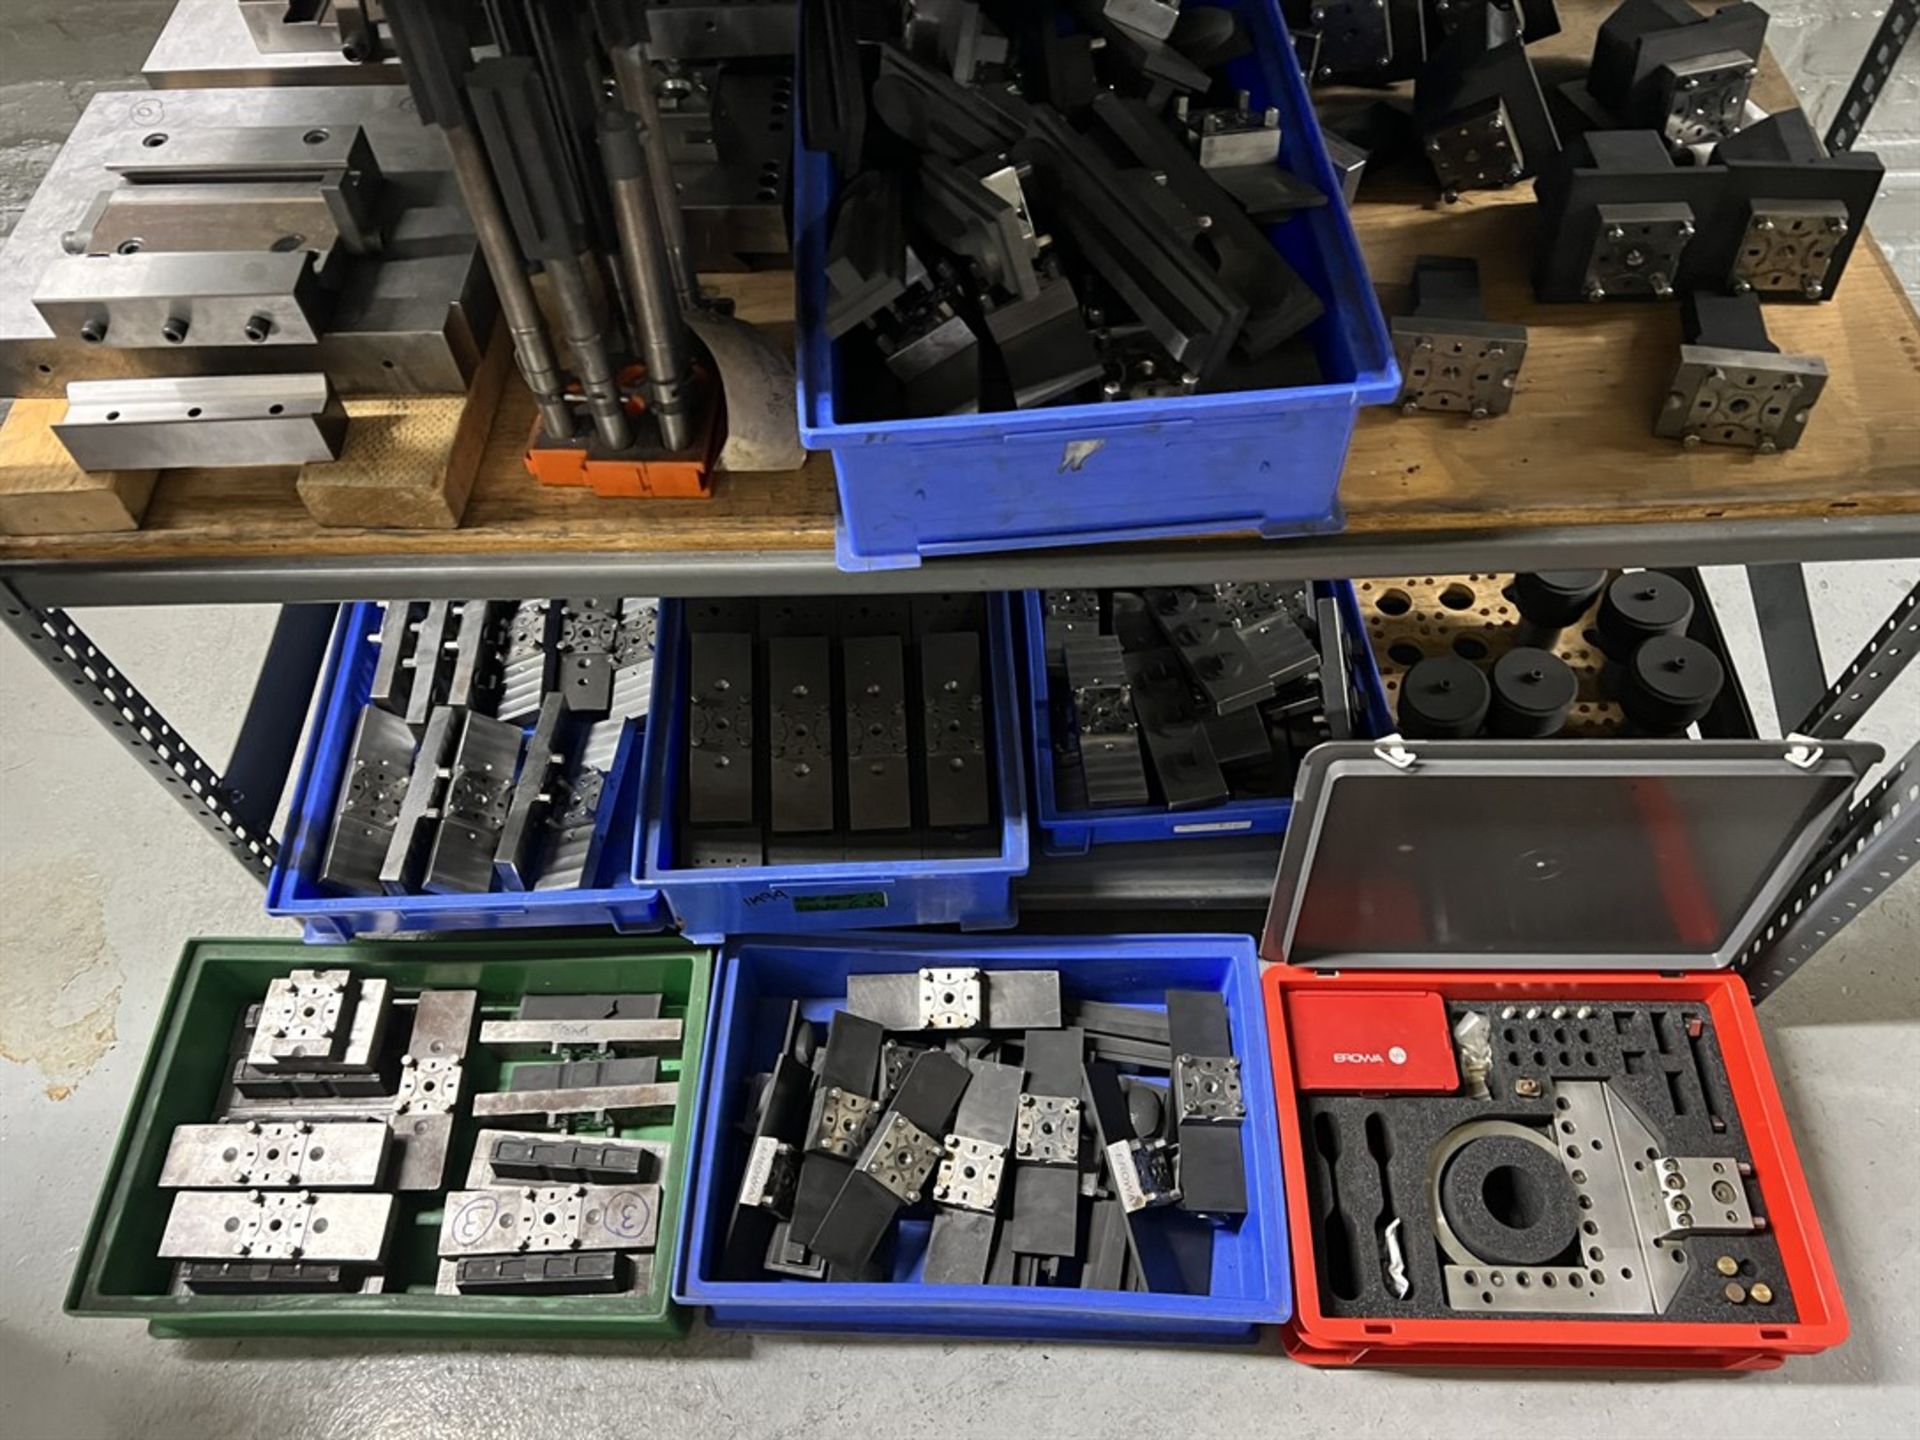 Rack of Assorted EROWA EDM Tooling, Fixtures, and Electrodes - Image 5 of 5